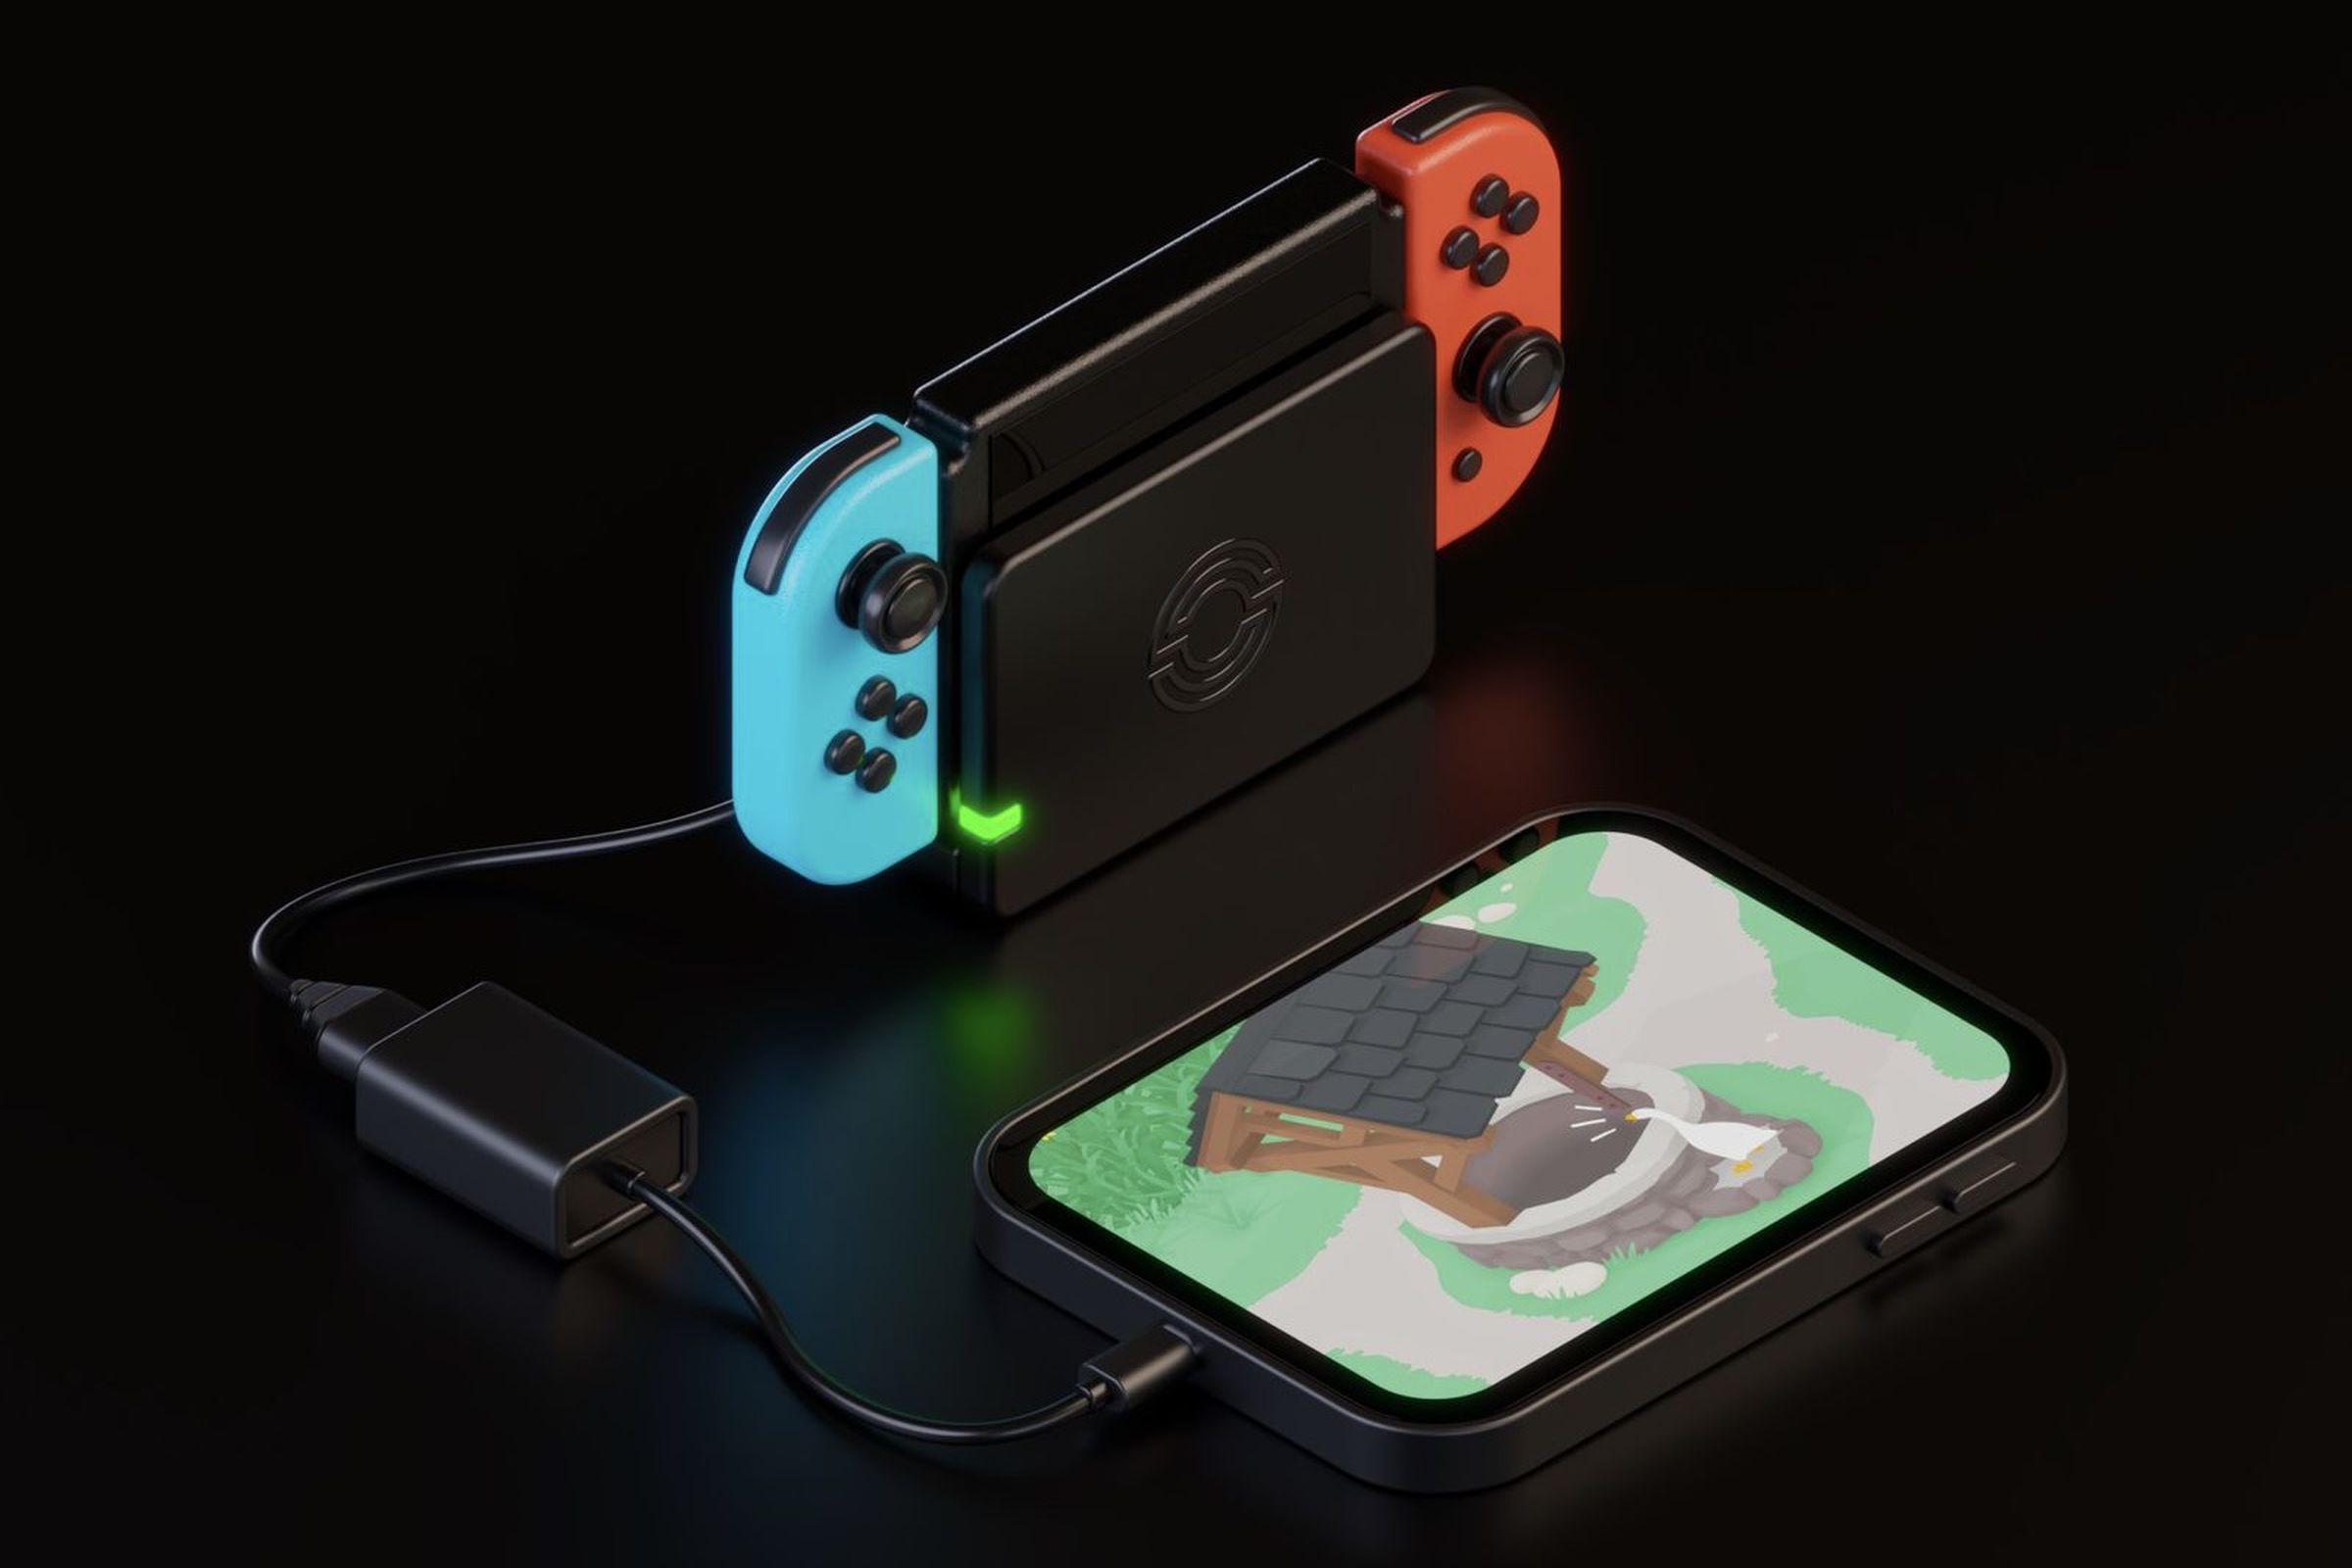 3D rendering of a Nintendo Switch with a capture box hooked up to an iPad